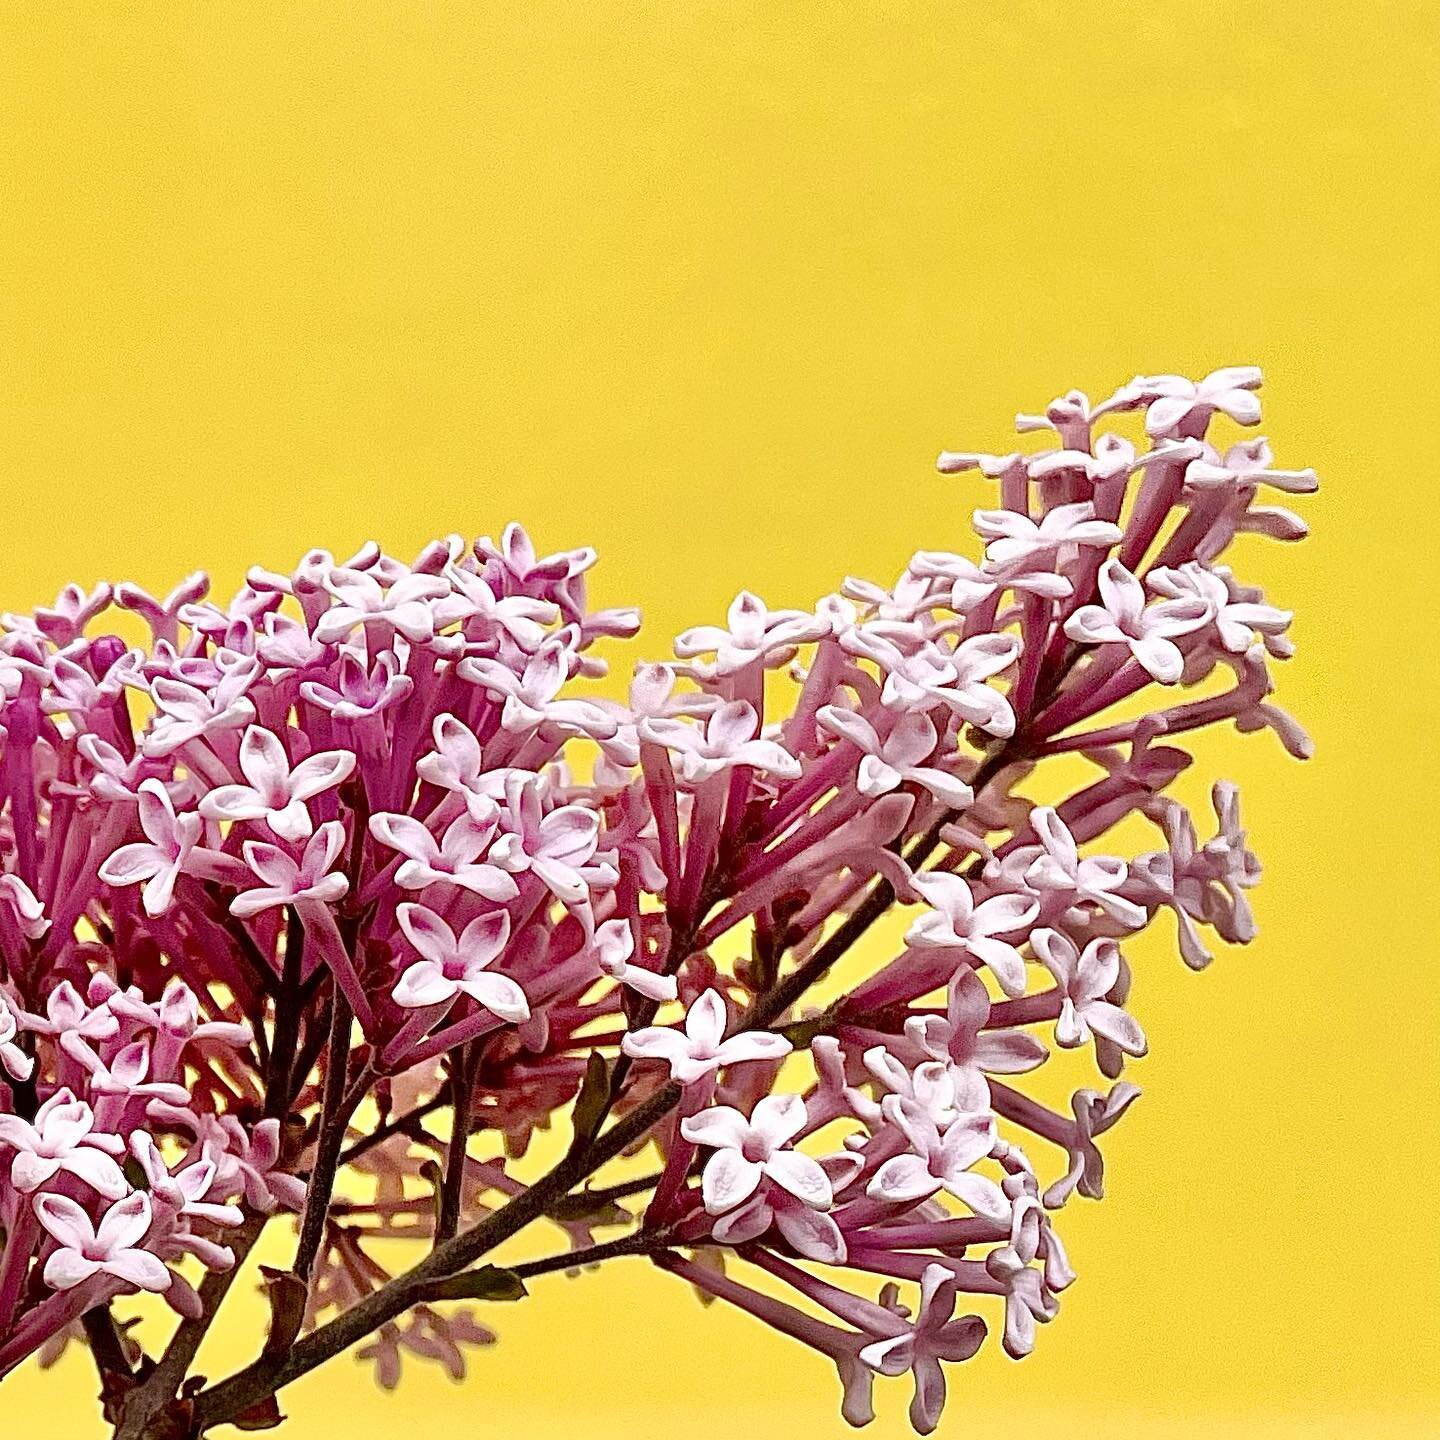 Spring is for admiring pretty flowers

ID: pink lilacs contrasted against a bright yellow background.